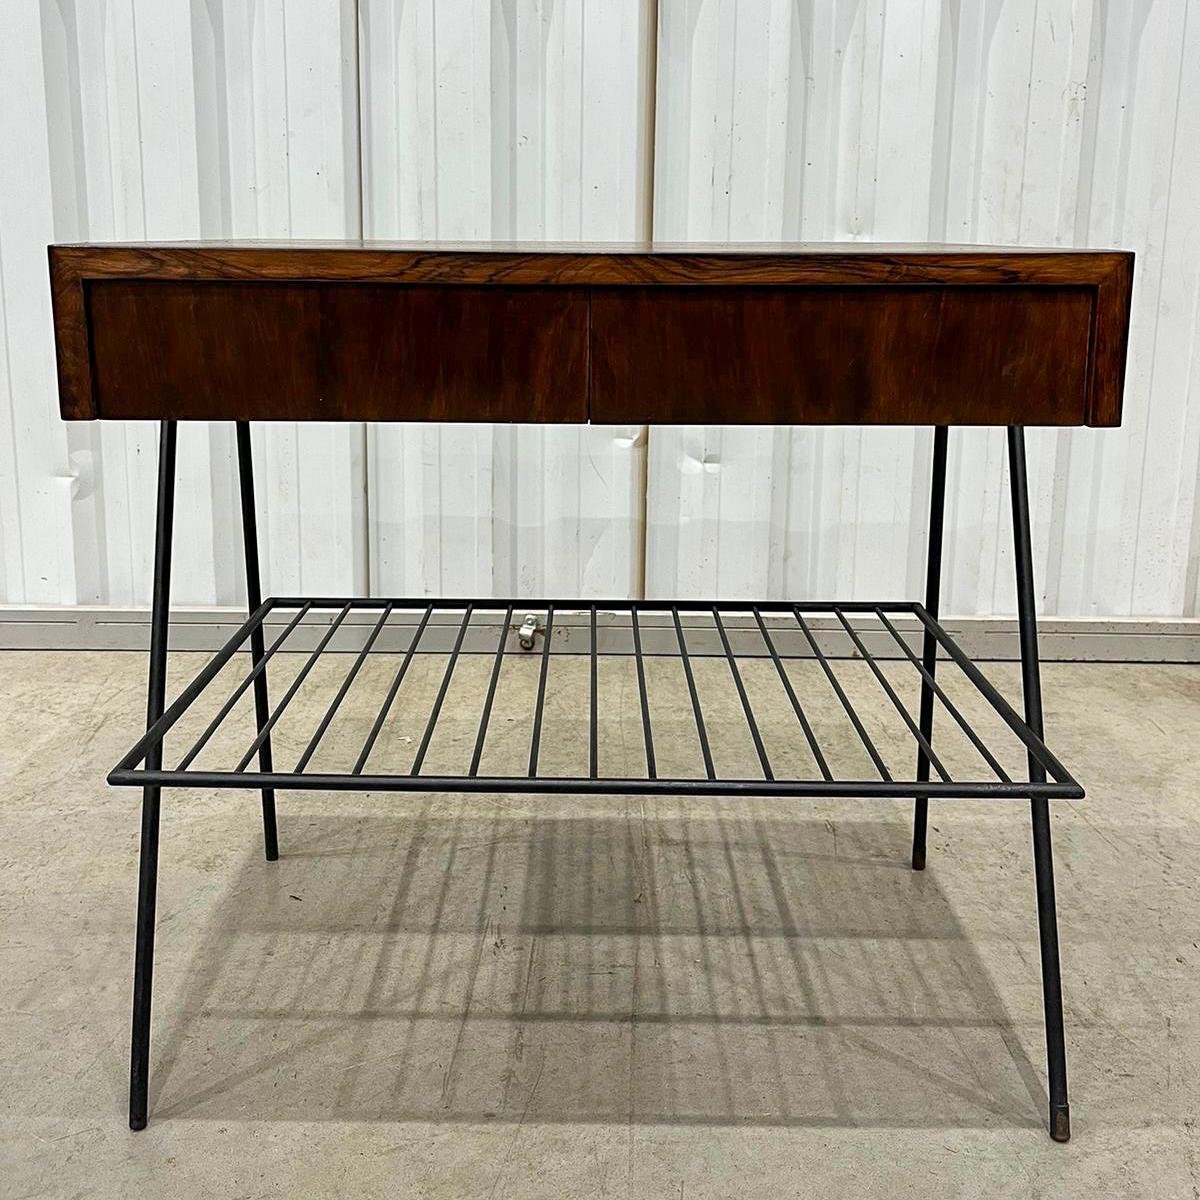 Brazilian Modern Side table in Hardwood and Metal, Unknown, c. 1950 For Sale 5